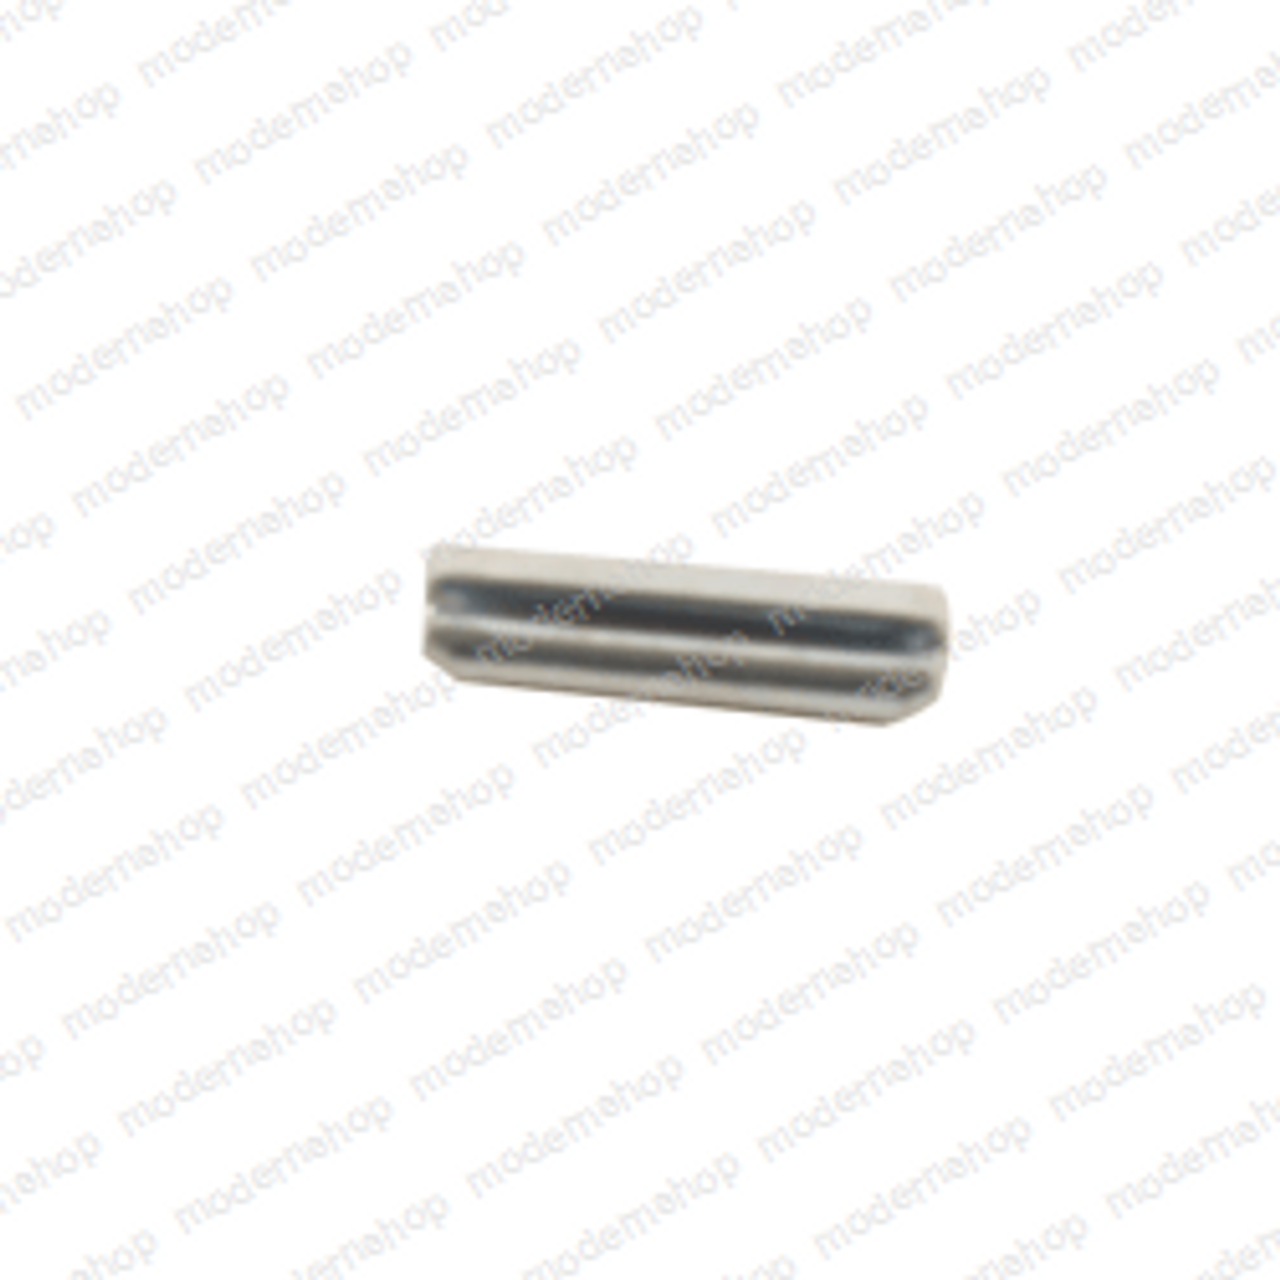 19971: Hyster Forklift PIN